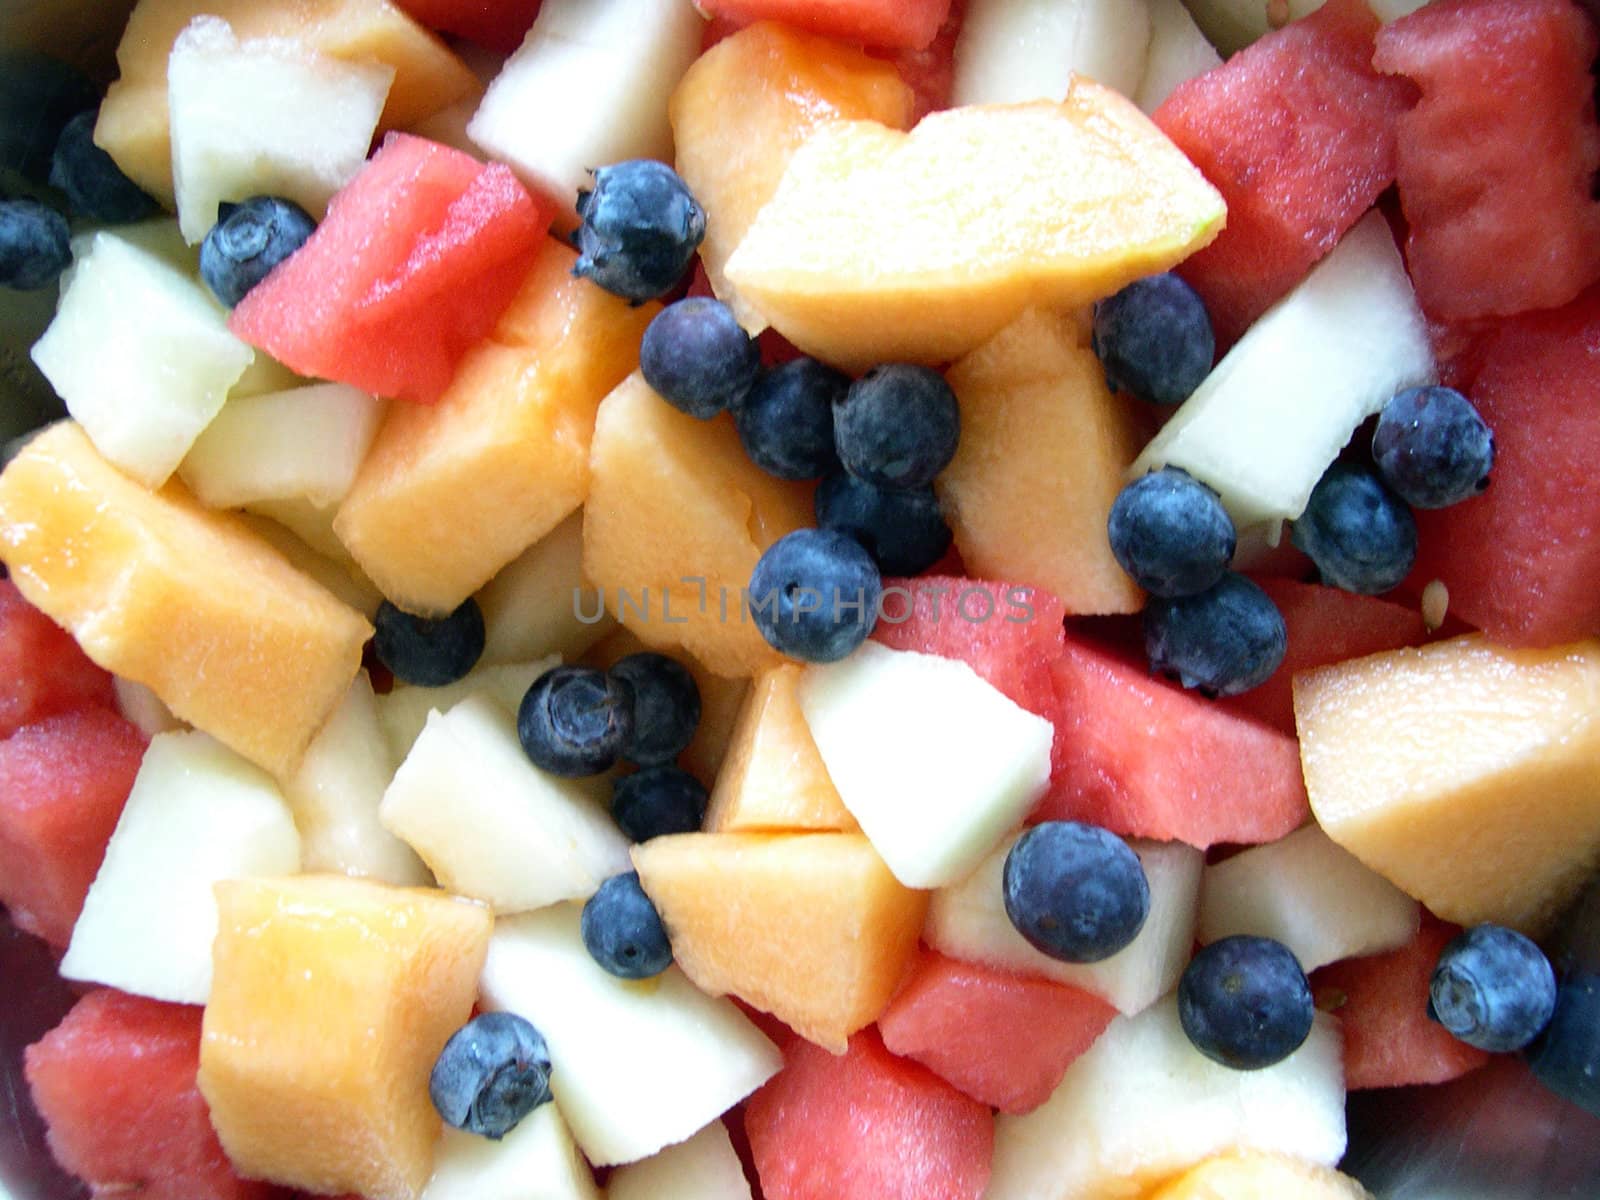 A bowl of fruit including watermelon, cantaloupe, canary melon, and blueberries.